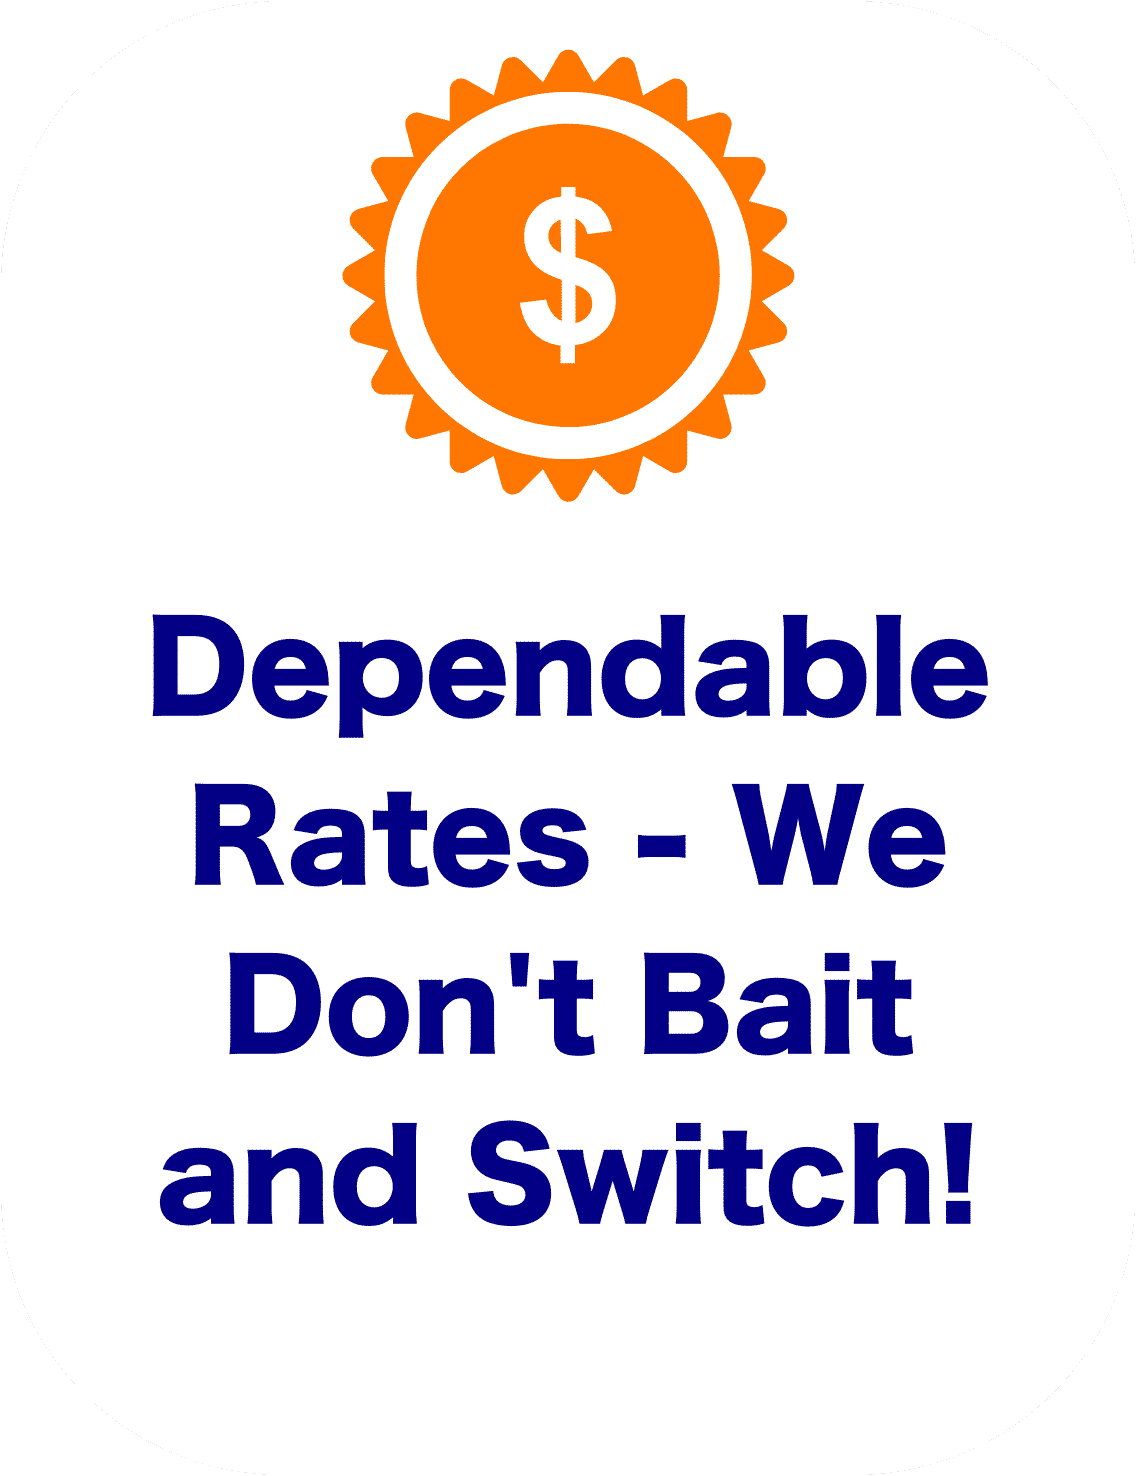 Dependable Rates - We Don't Bait and Switch!